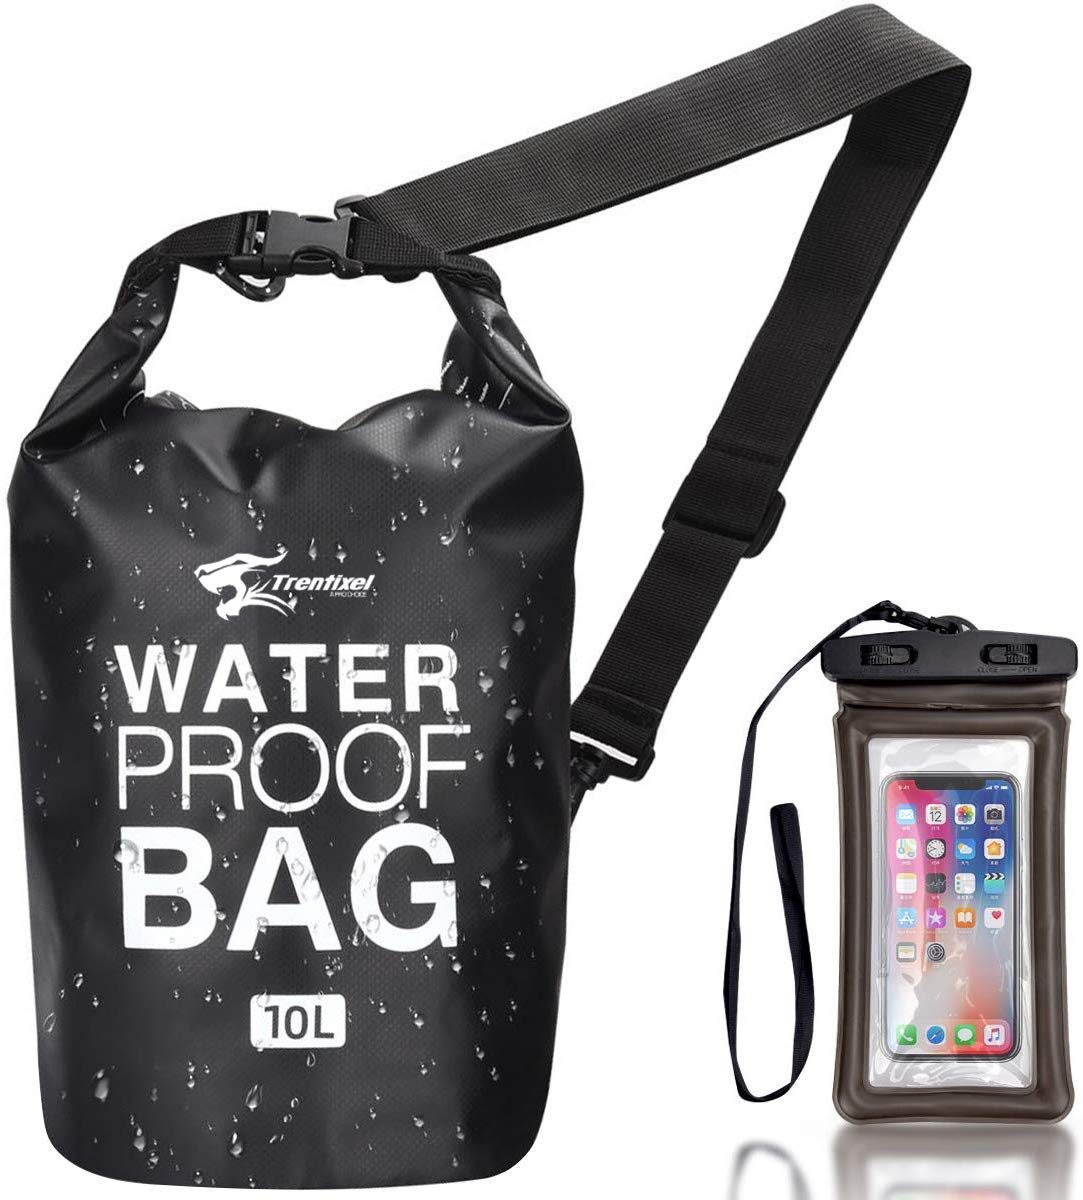 Book Cover Waterproof Dry Bags, Floating Dry Sack with Detachable Shoulder Strap, 5L/10L/20L Large Dry Bag for Fishing, Kayaking, Surfing, Rafting, Hiking and Camping (5L)